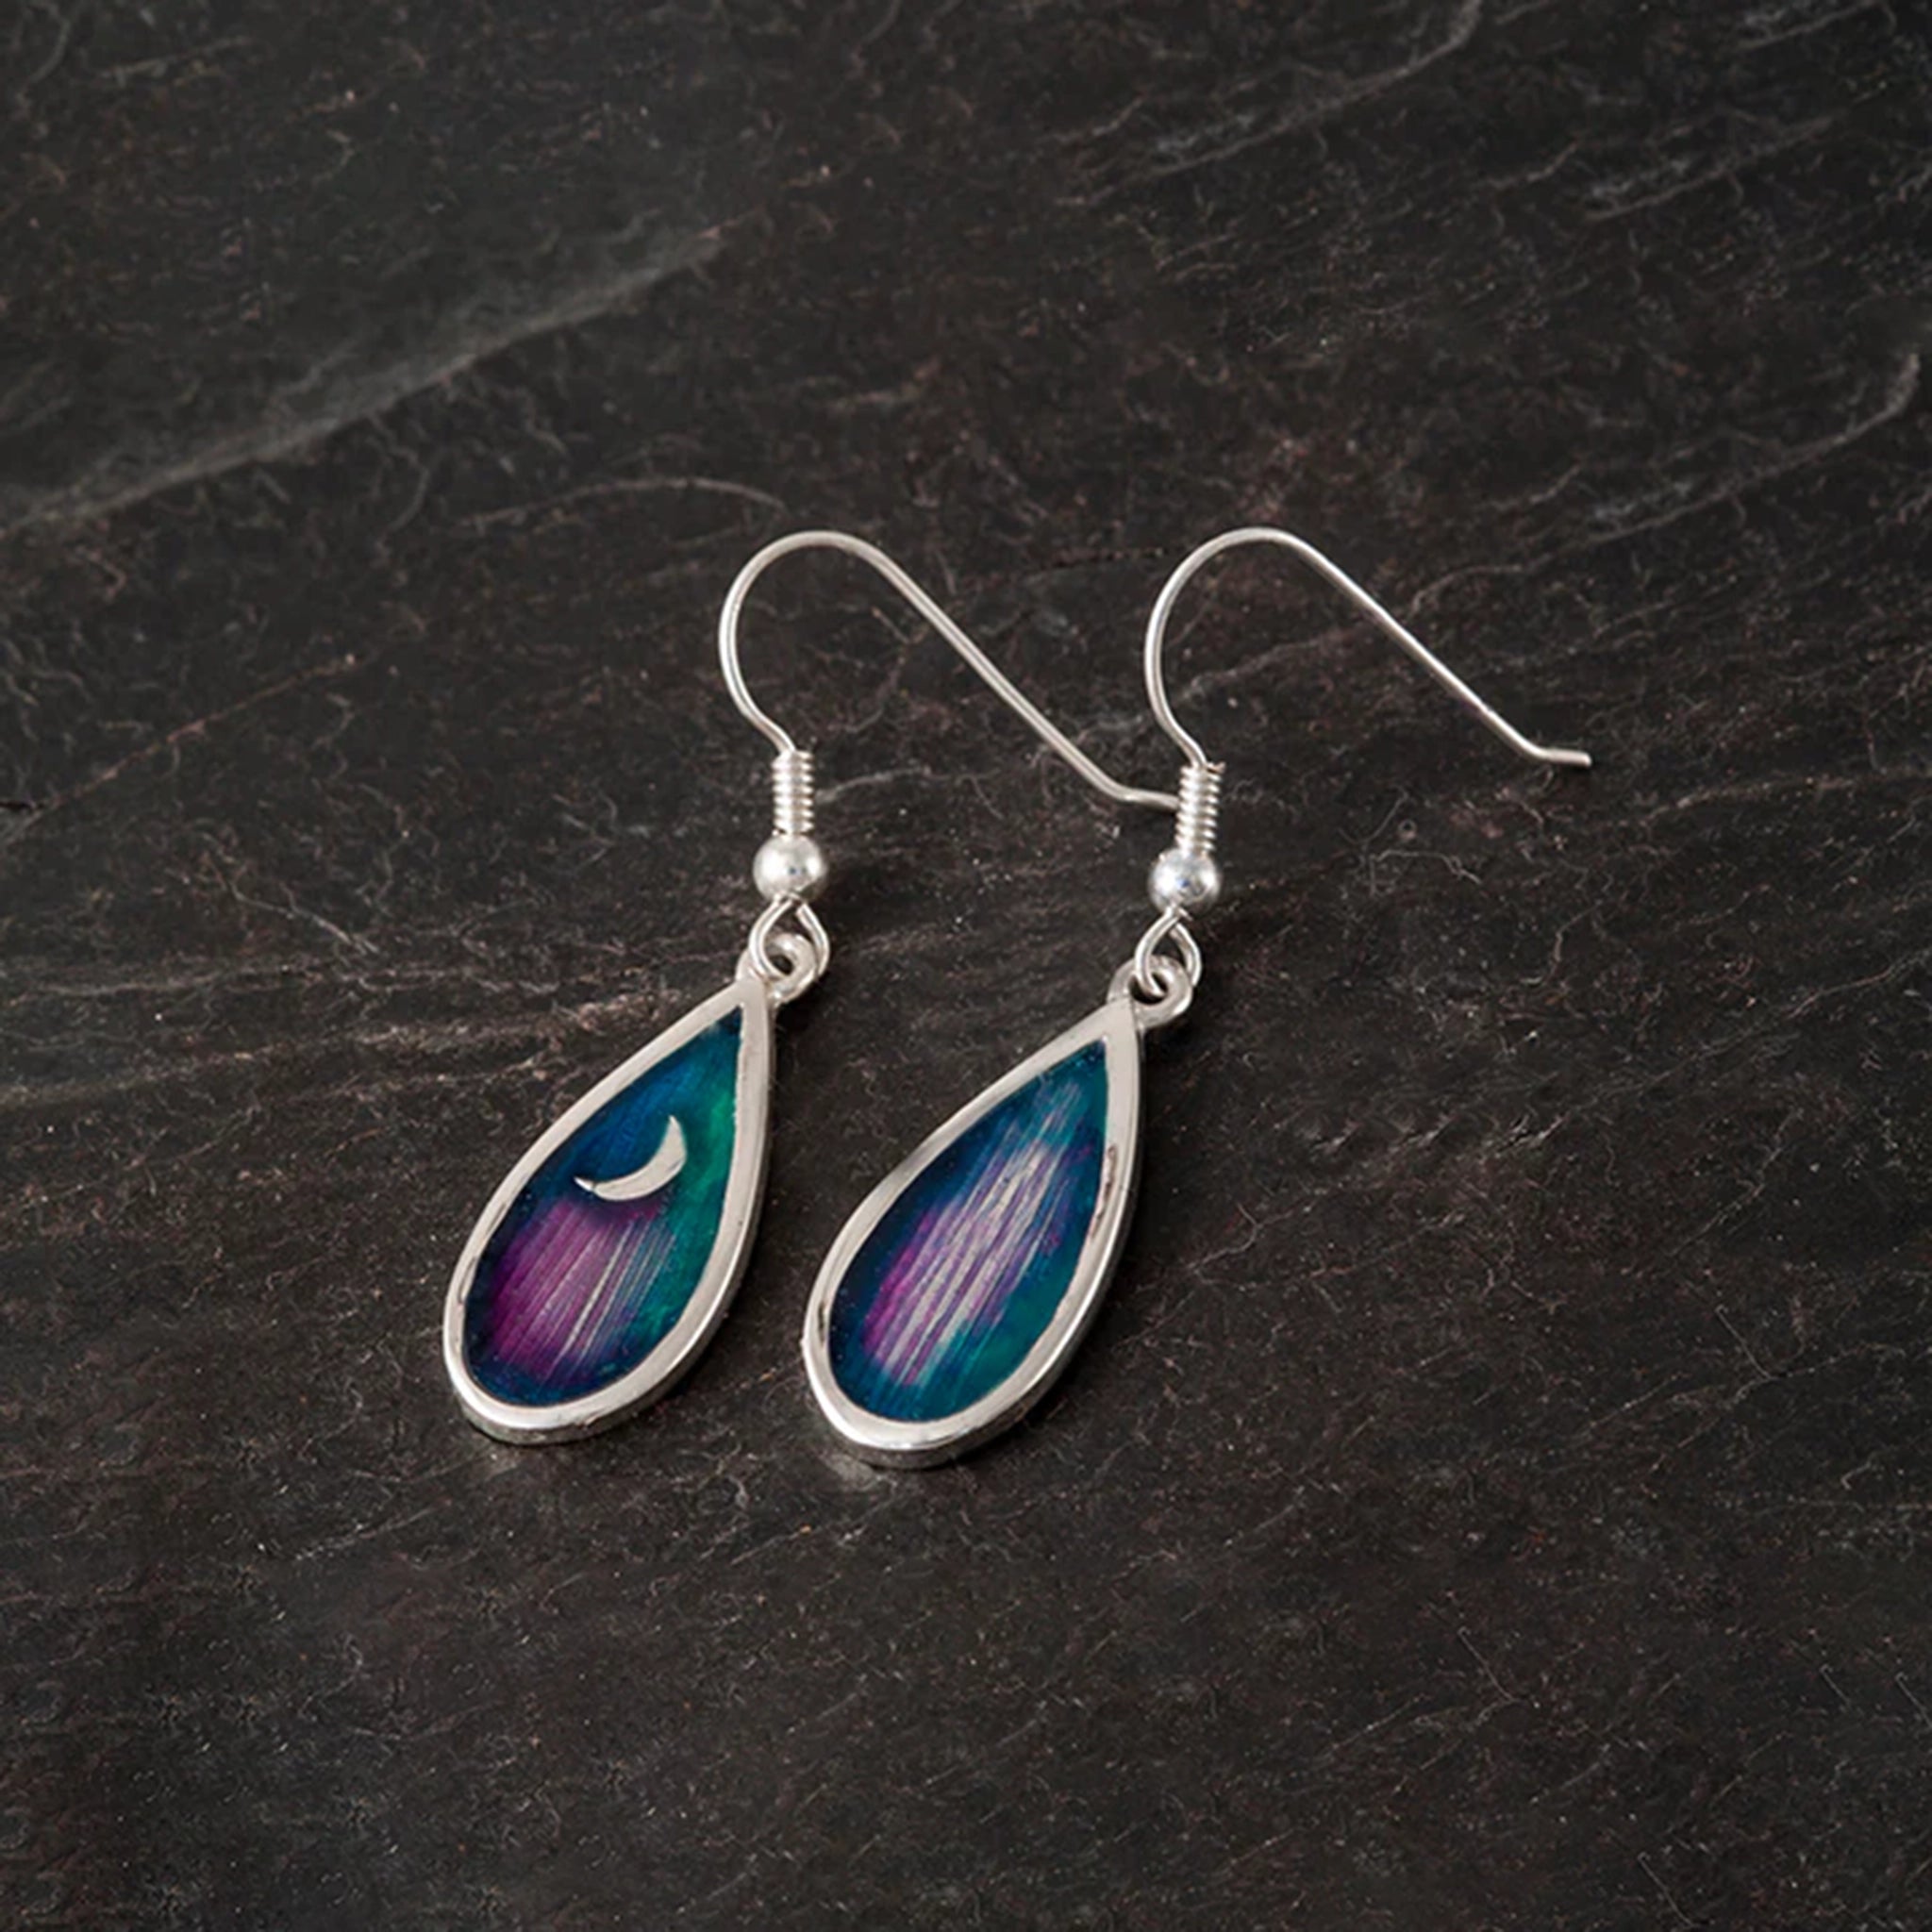 A pair of teardrop shaped earrings with silver frame and blue and purple enamel